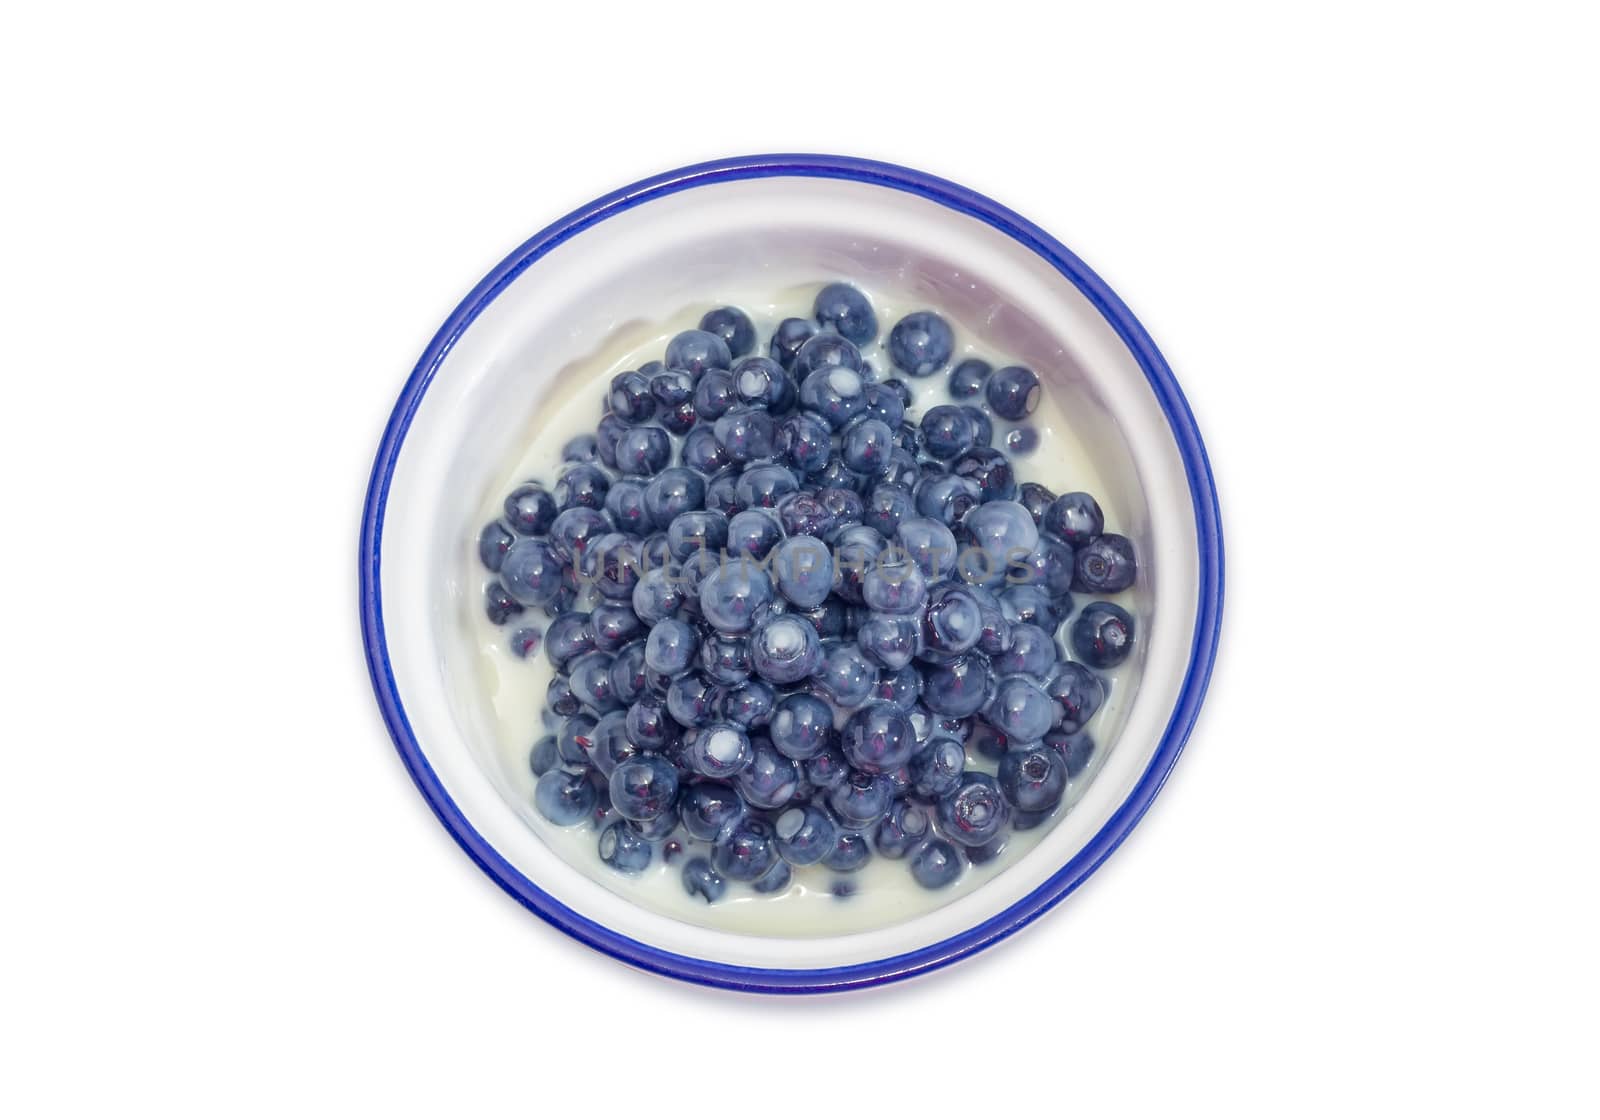 Top view of the bilberry dessert with sweetened condensed milk by anmbph